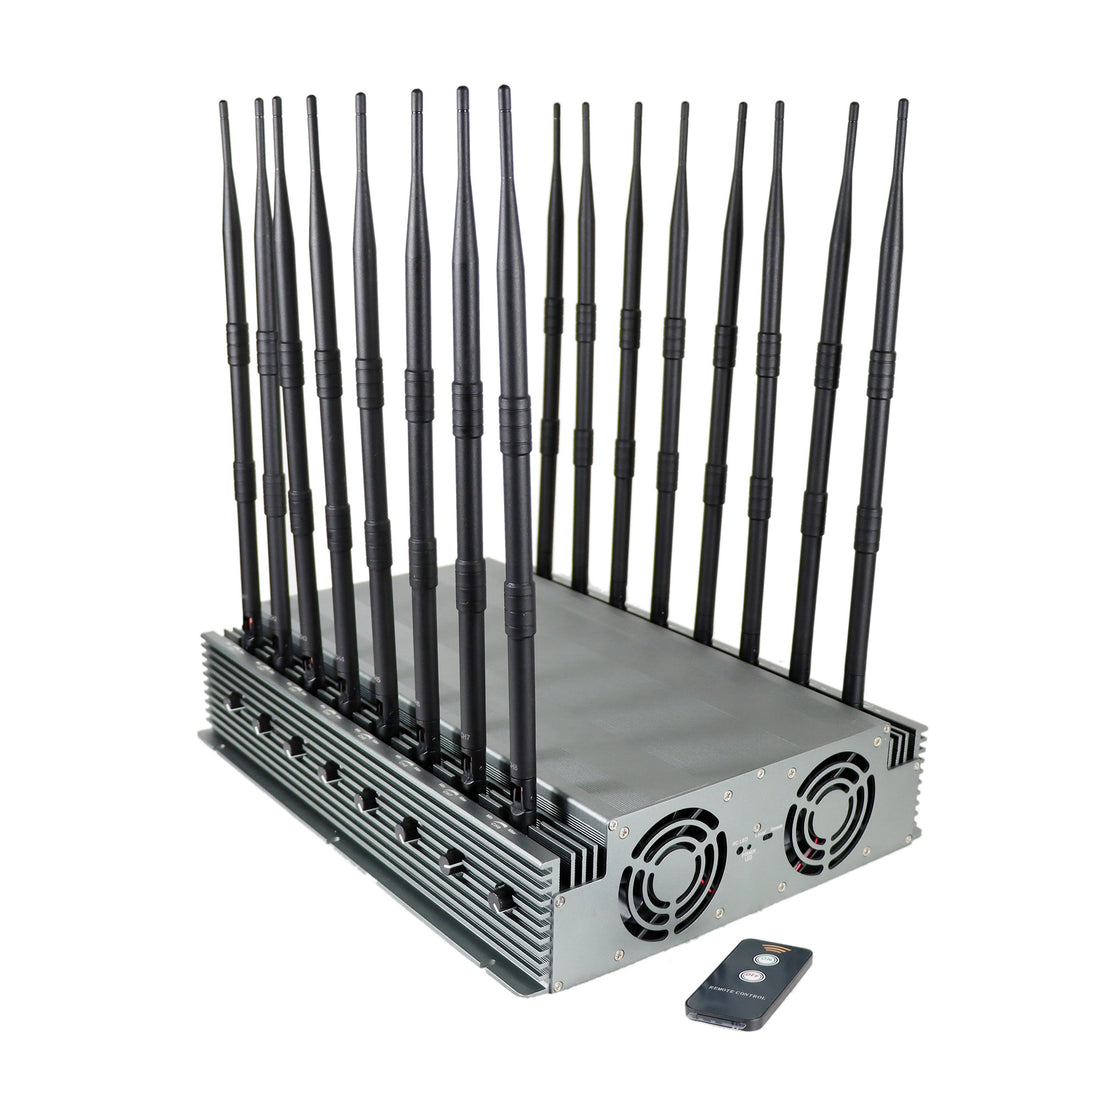 Does the mobile phone signal jammer have radiation?